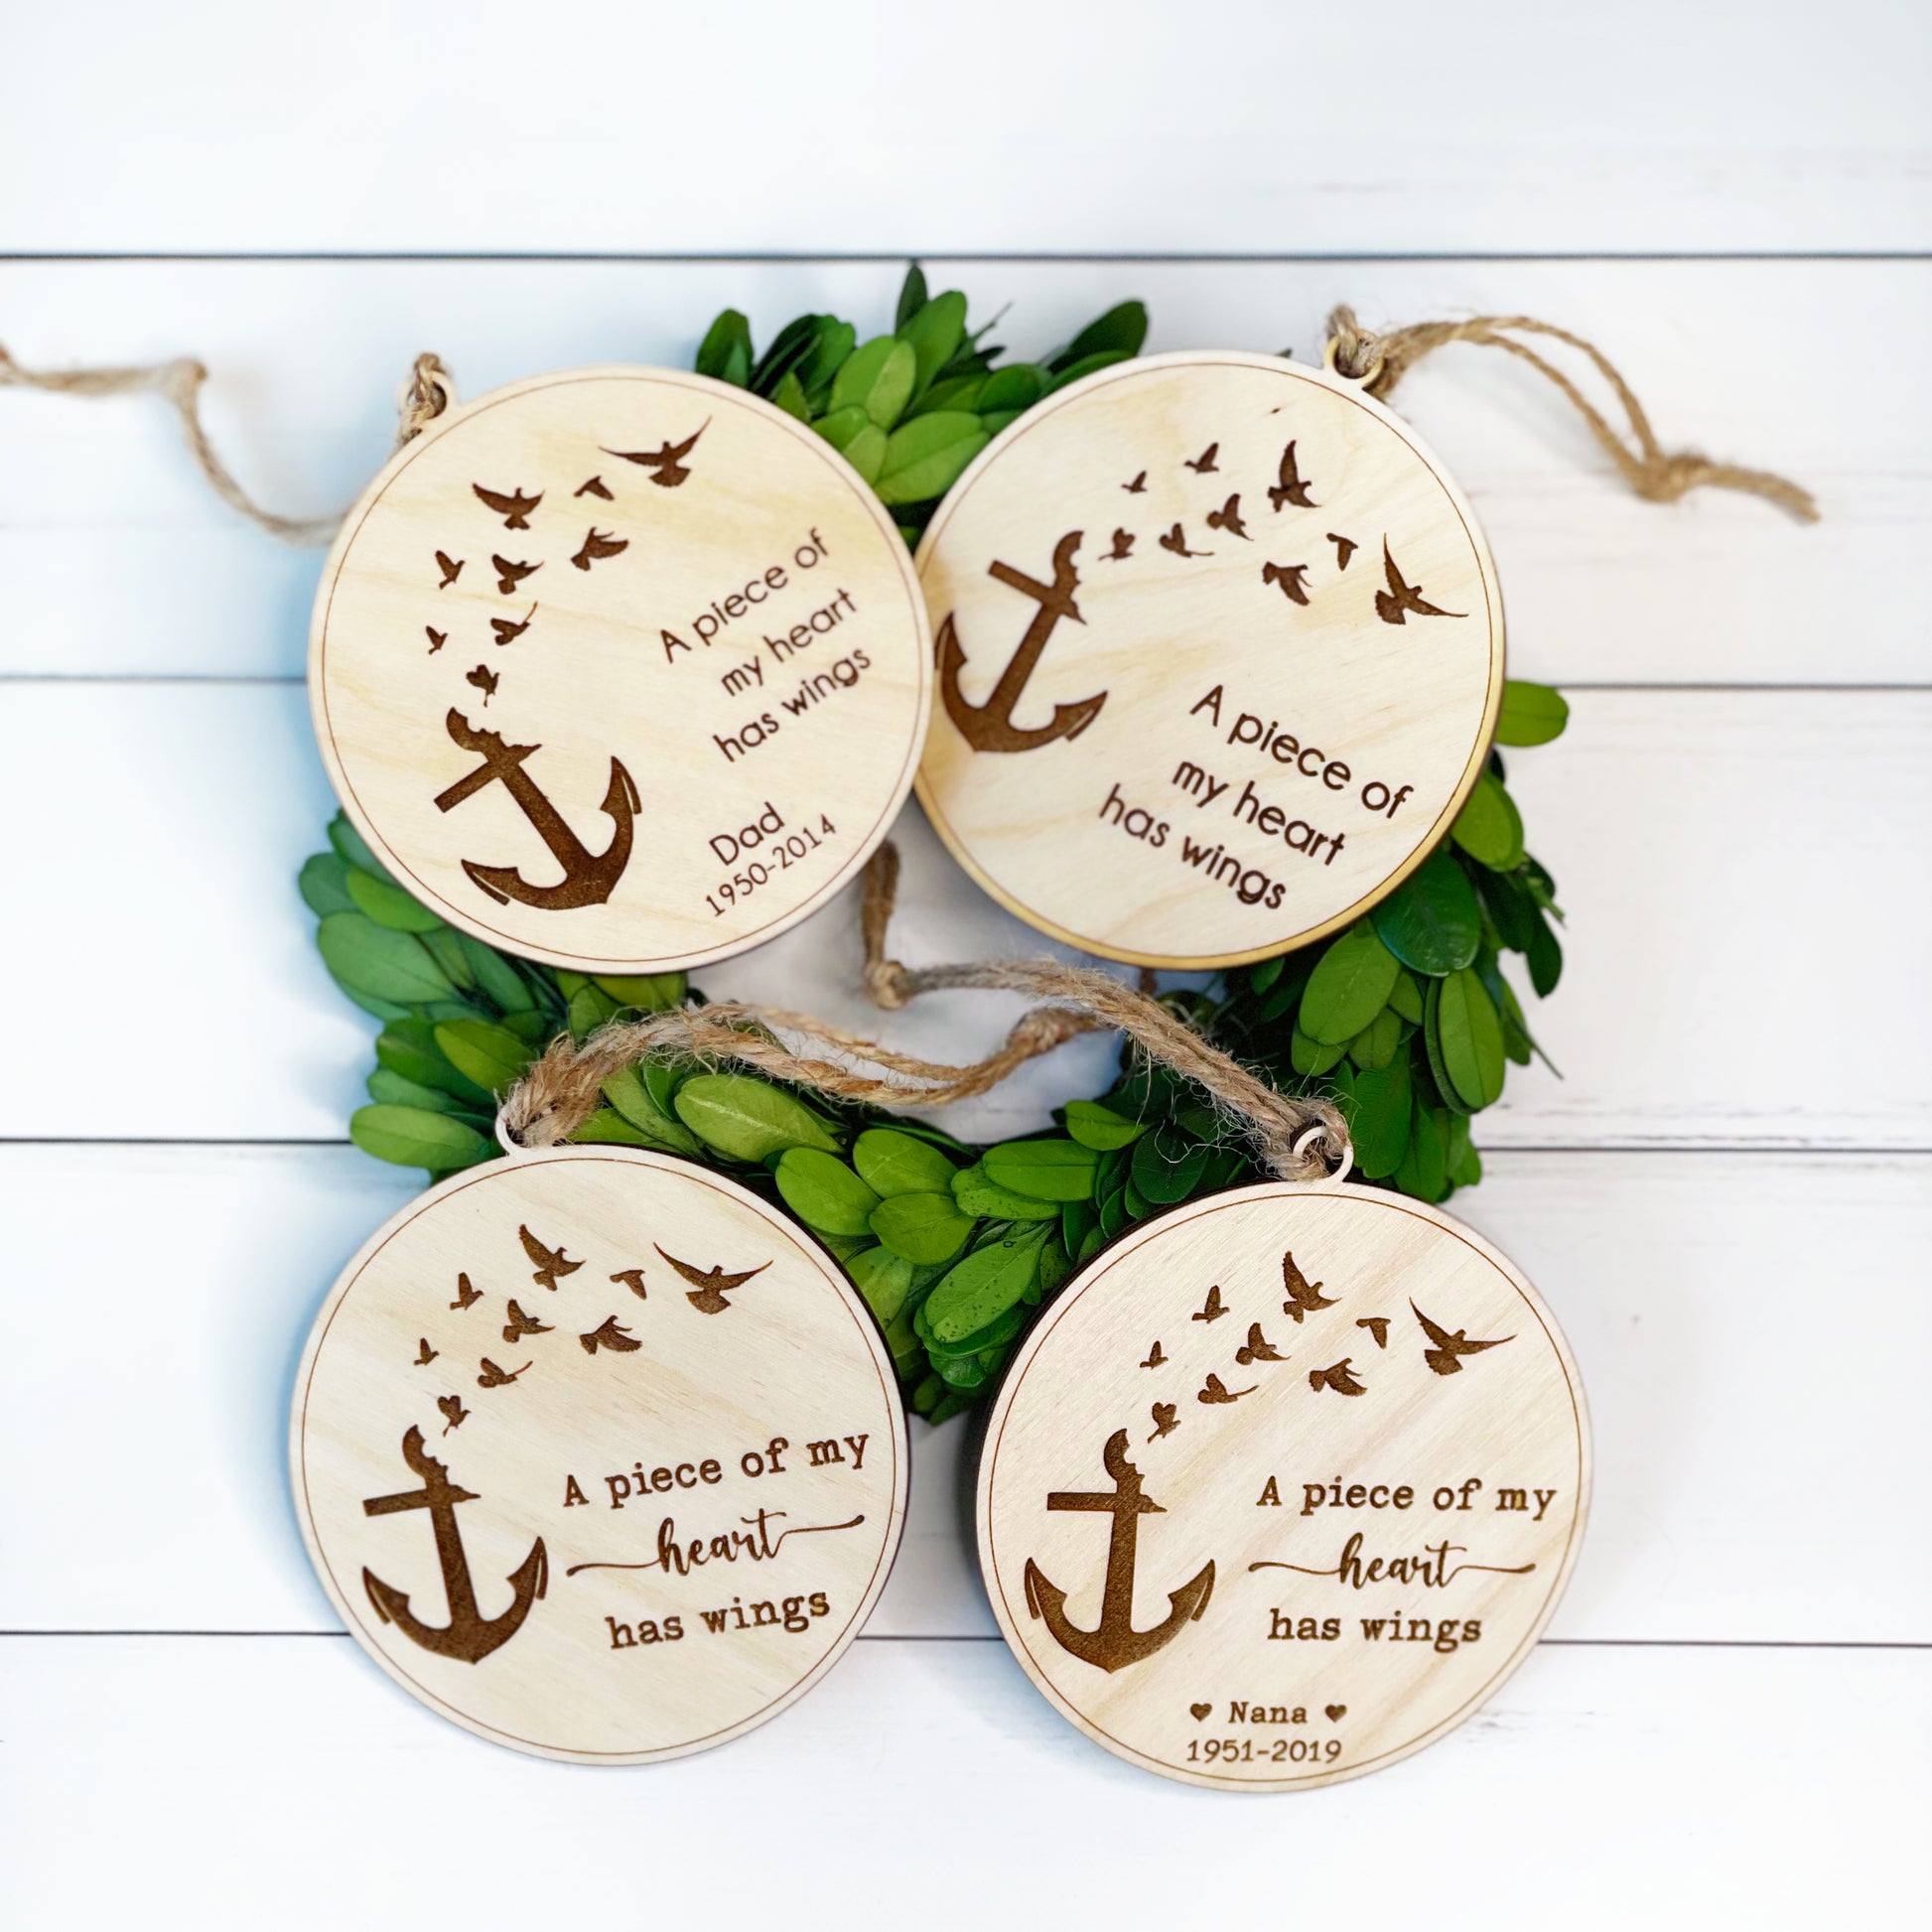 Engraved custom ornaments for Loss of Loved one, A piece of my heart has wings